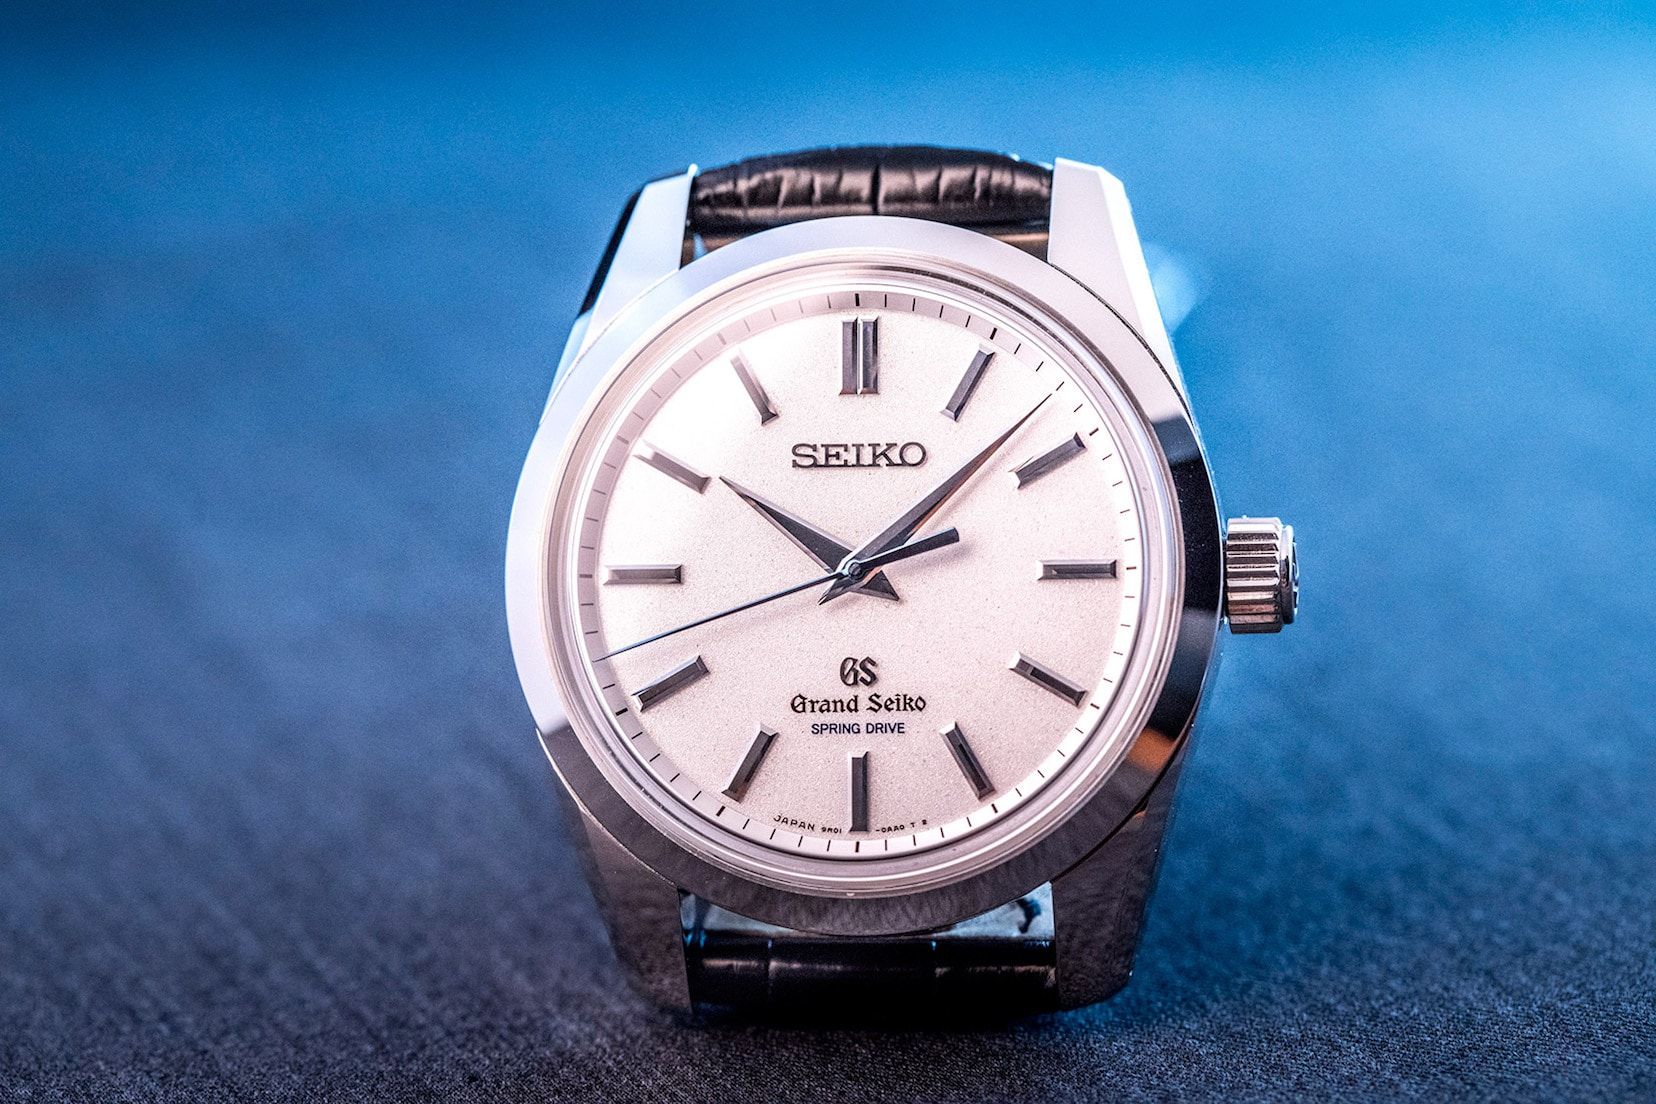 History of Time: Grand Seiko and the eternal quest for perfection